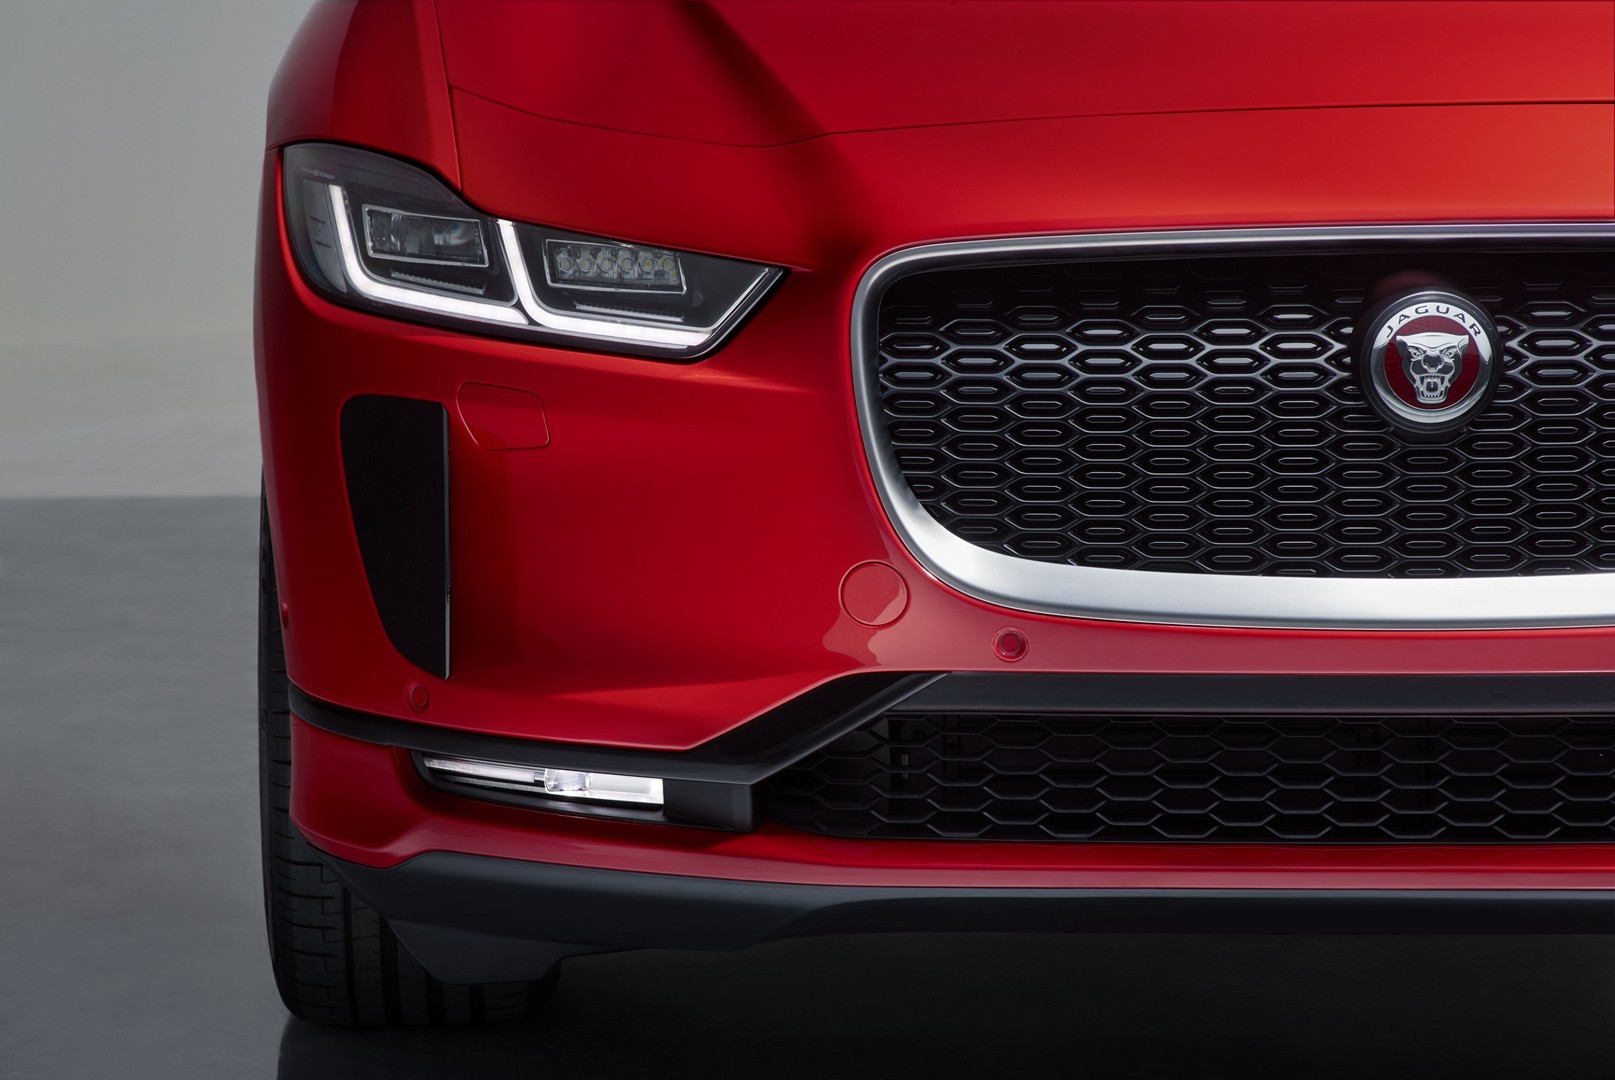 https://s1.cdn.autoevolution.com/images/news/gallery/2020-jaguar-i-pace-update-offers-234-miles-of-range-thanks-to-etrophy-know-how_87.jpg